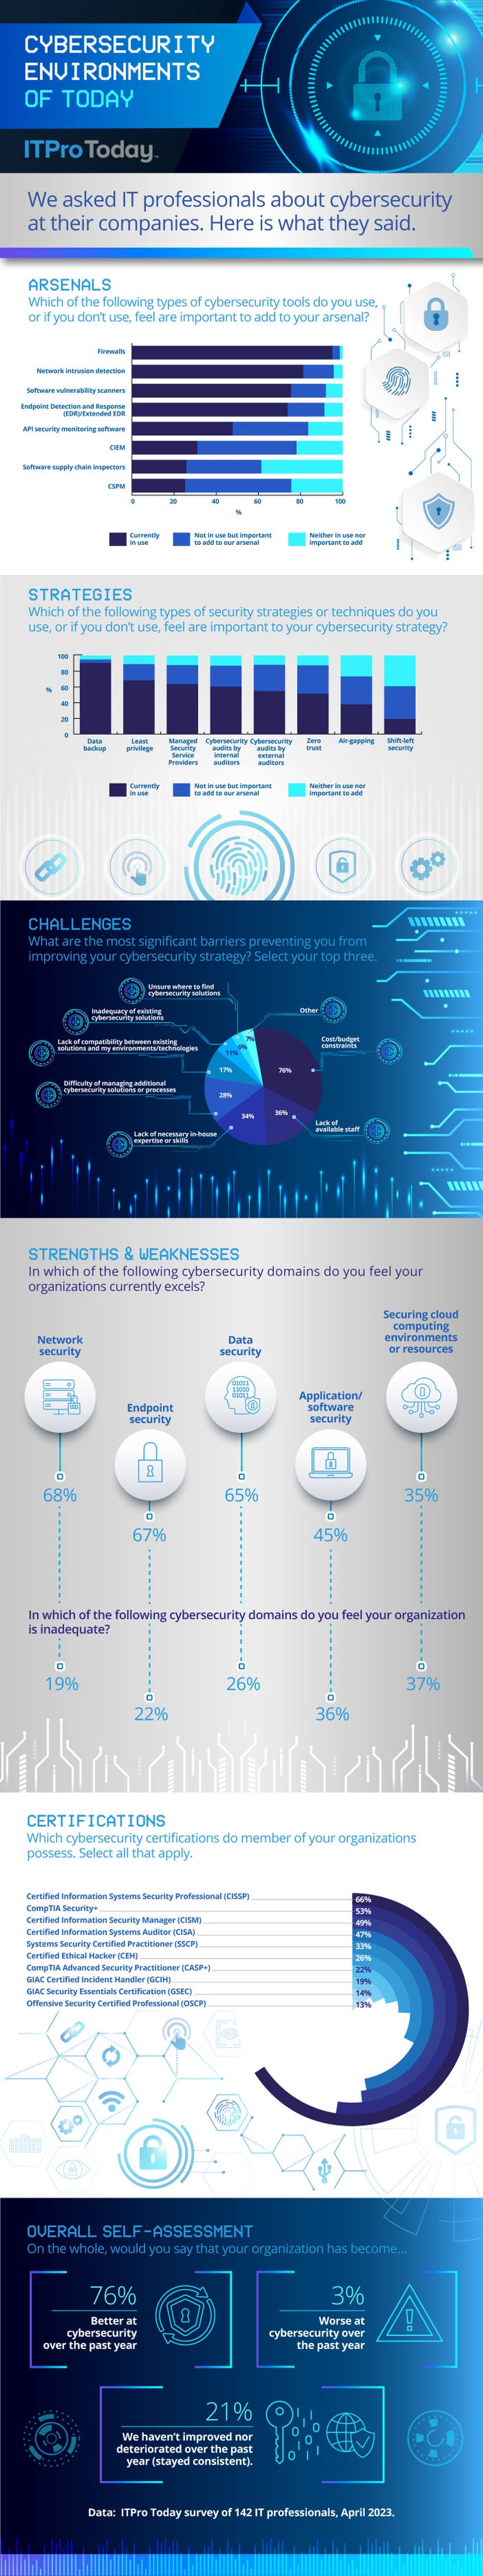 Infographic displays data about cybersecurity from a survey of IT professionals